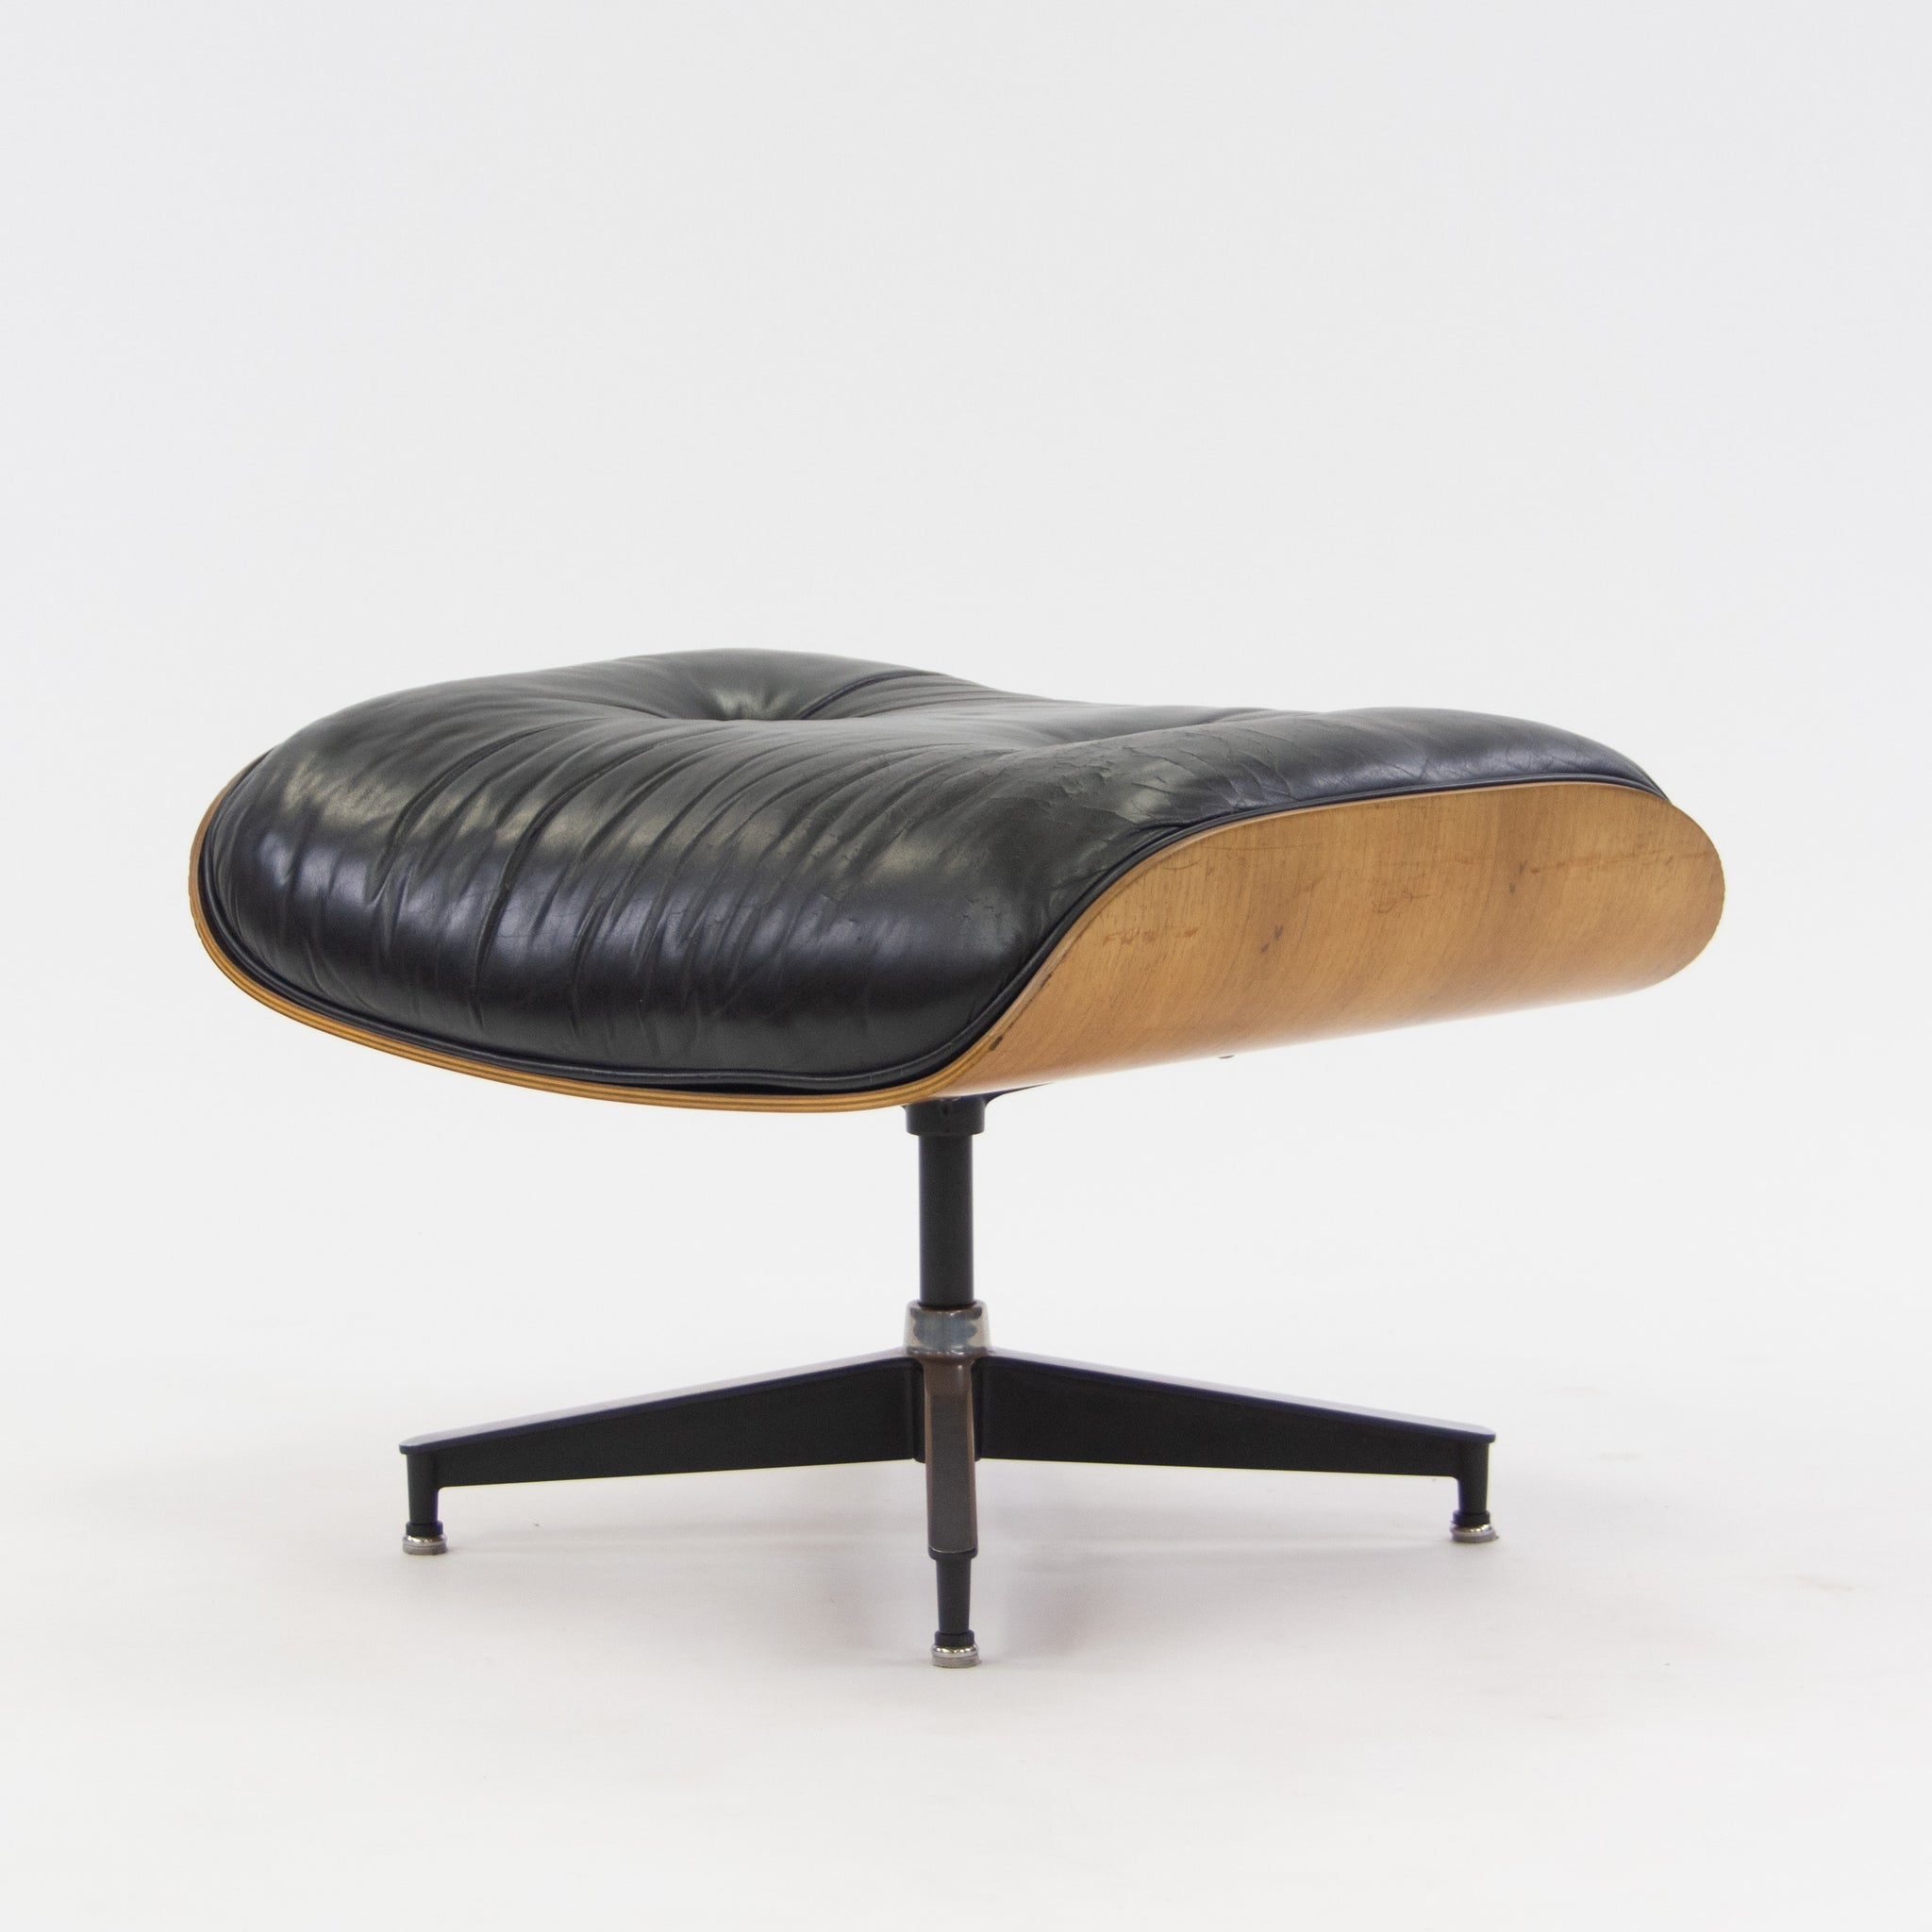 SOLD 1970's Herman Miller Eames Lounge Chair & Ottoman Rosewood 670 671 Black Leather